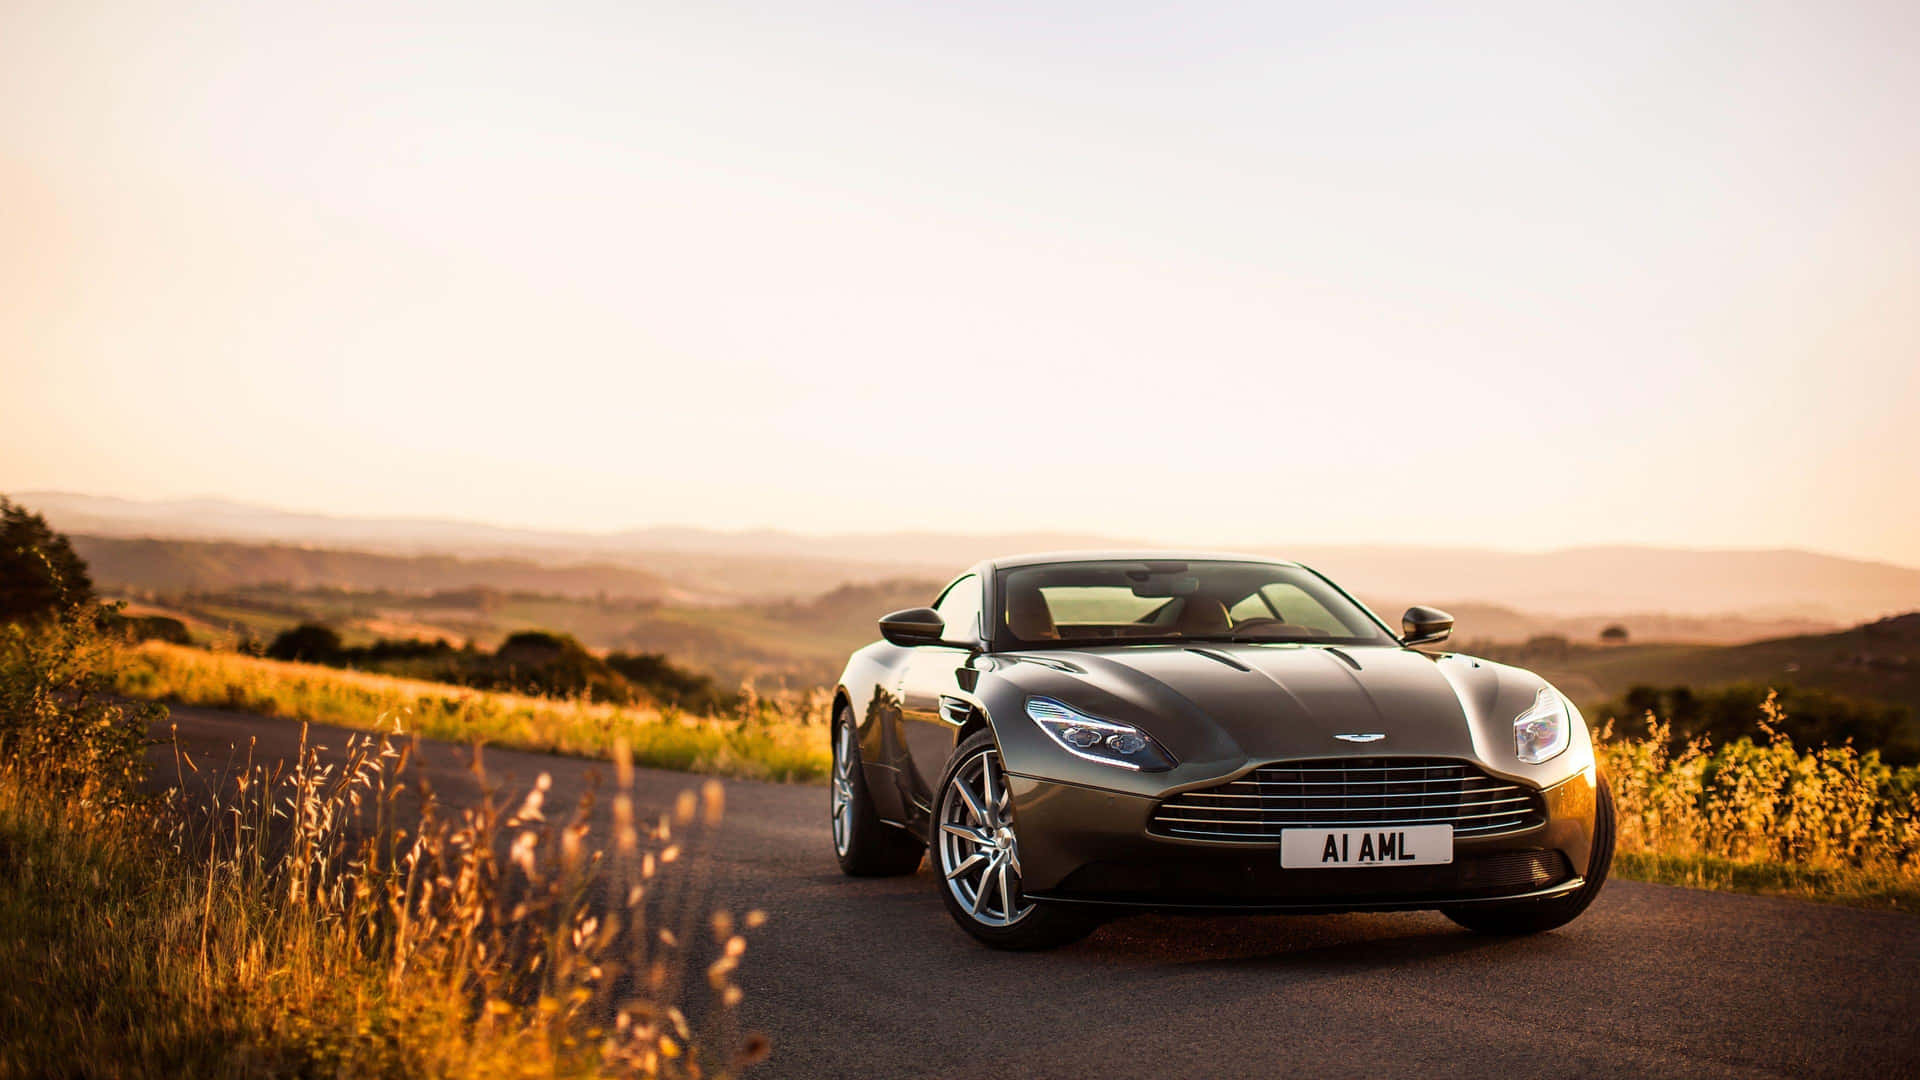 Aston Martin DB11 - The Epitome of Luxury and Performance Wallpaper